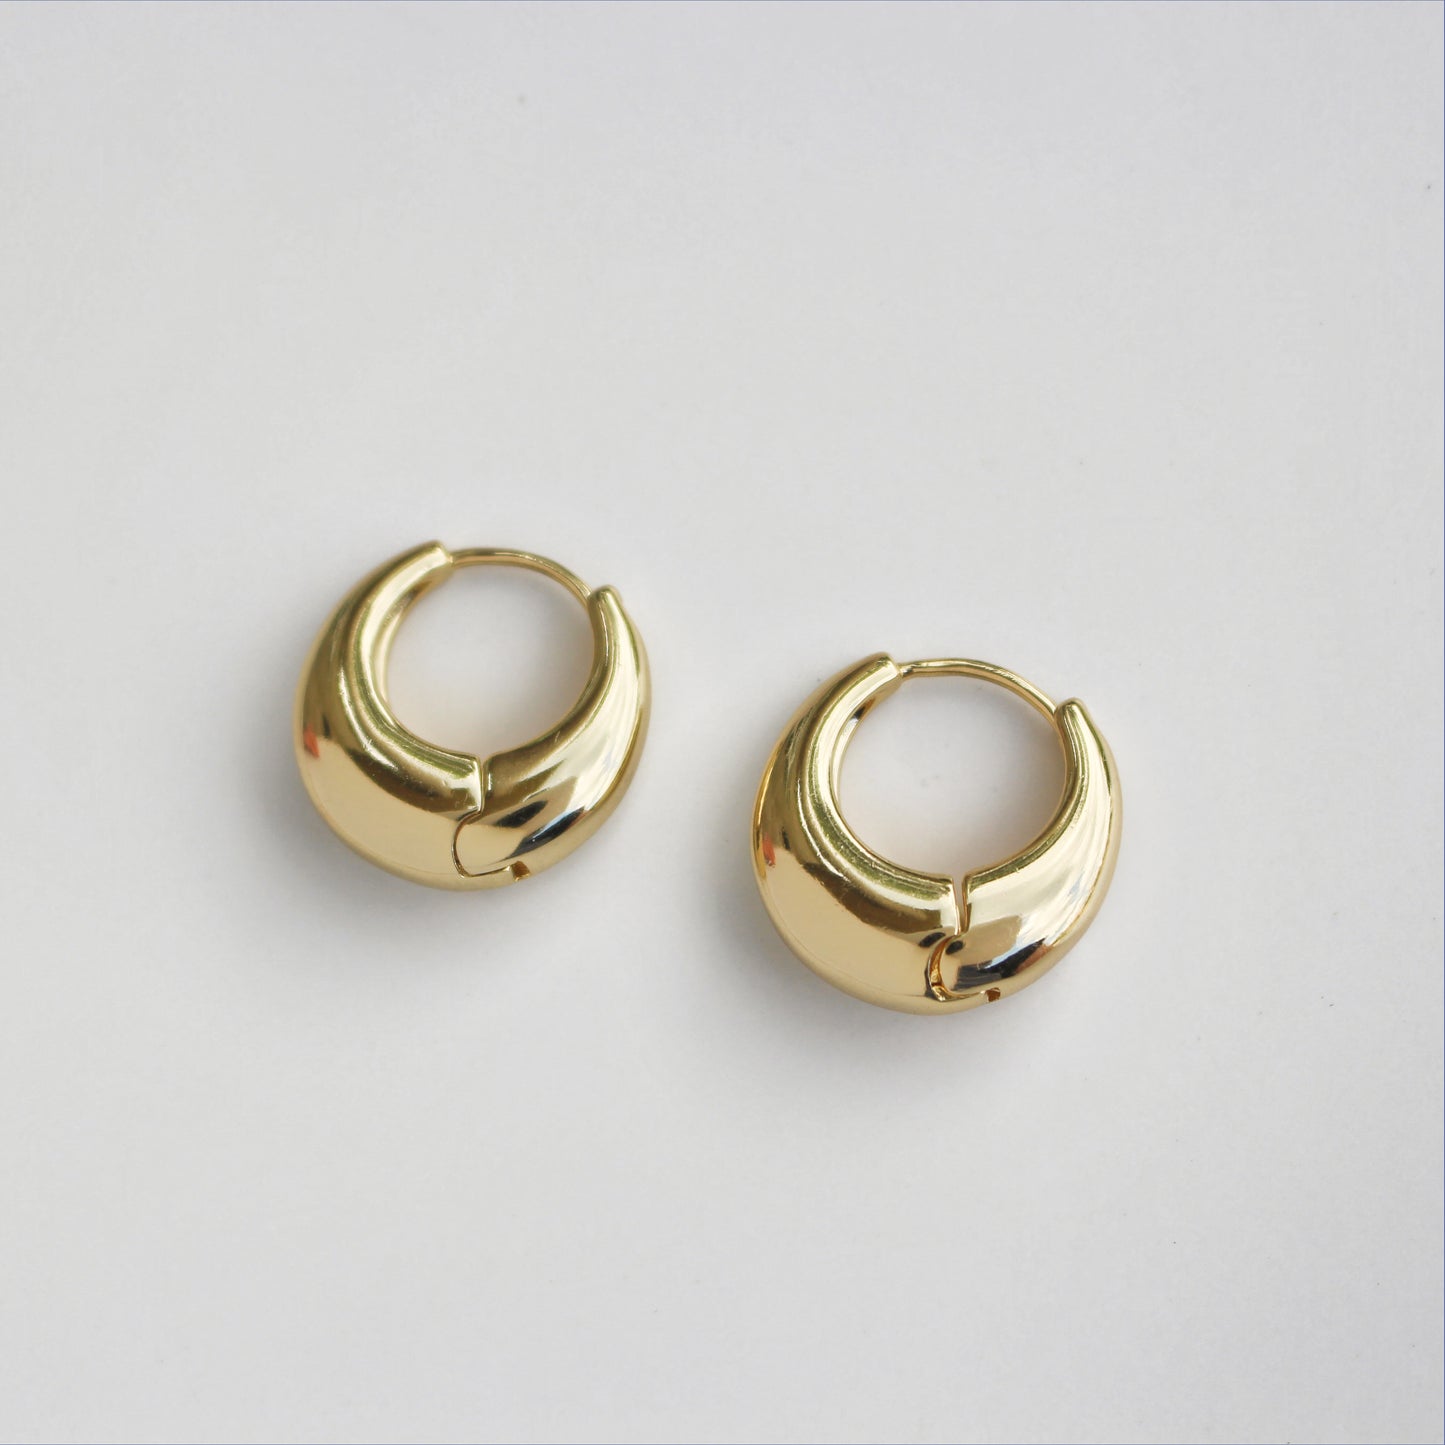 PURSA - Chunky Double Dipped 14kt Gold Hoops Earrings ∙ 19mm ∙ Minimalist Creoles